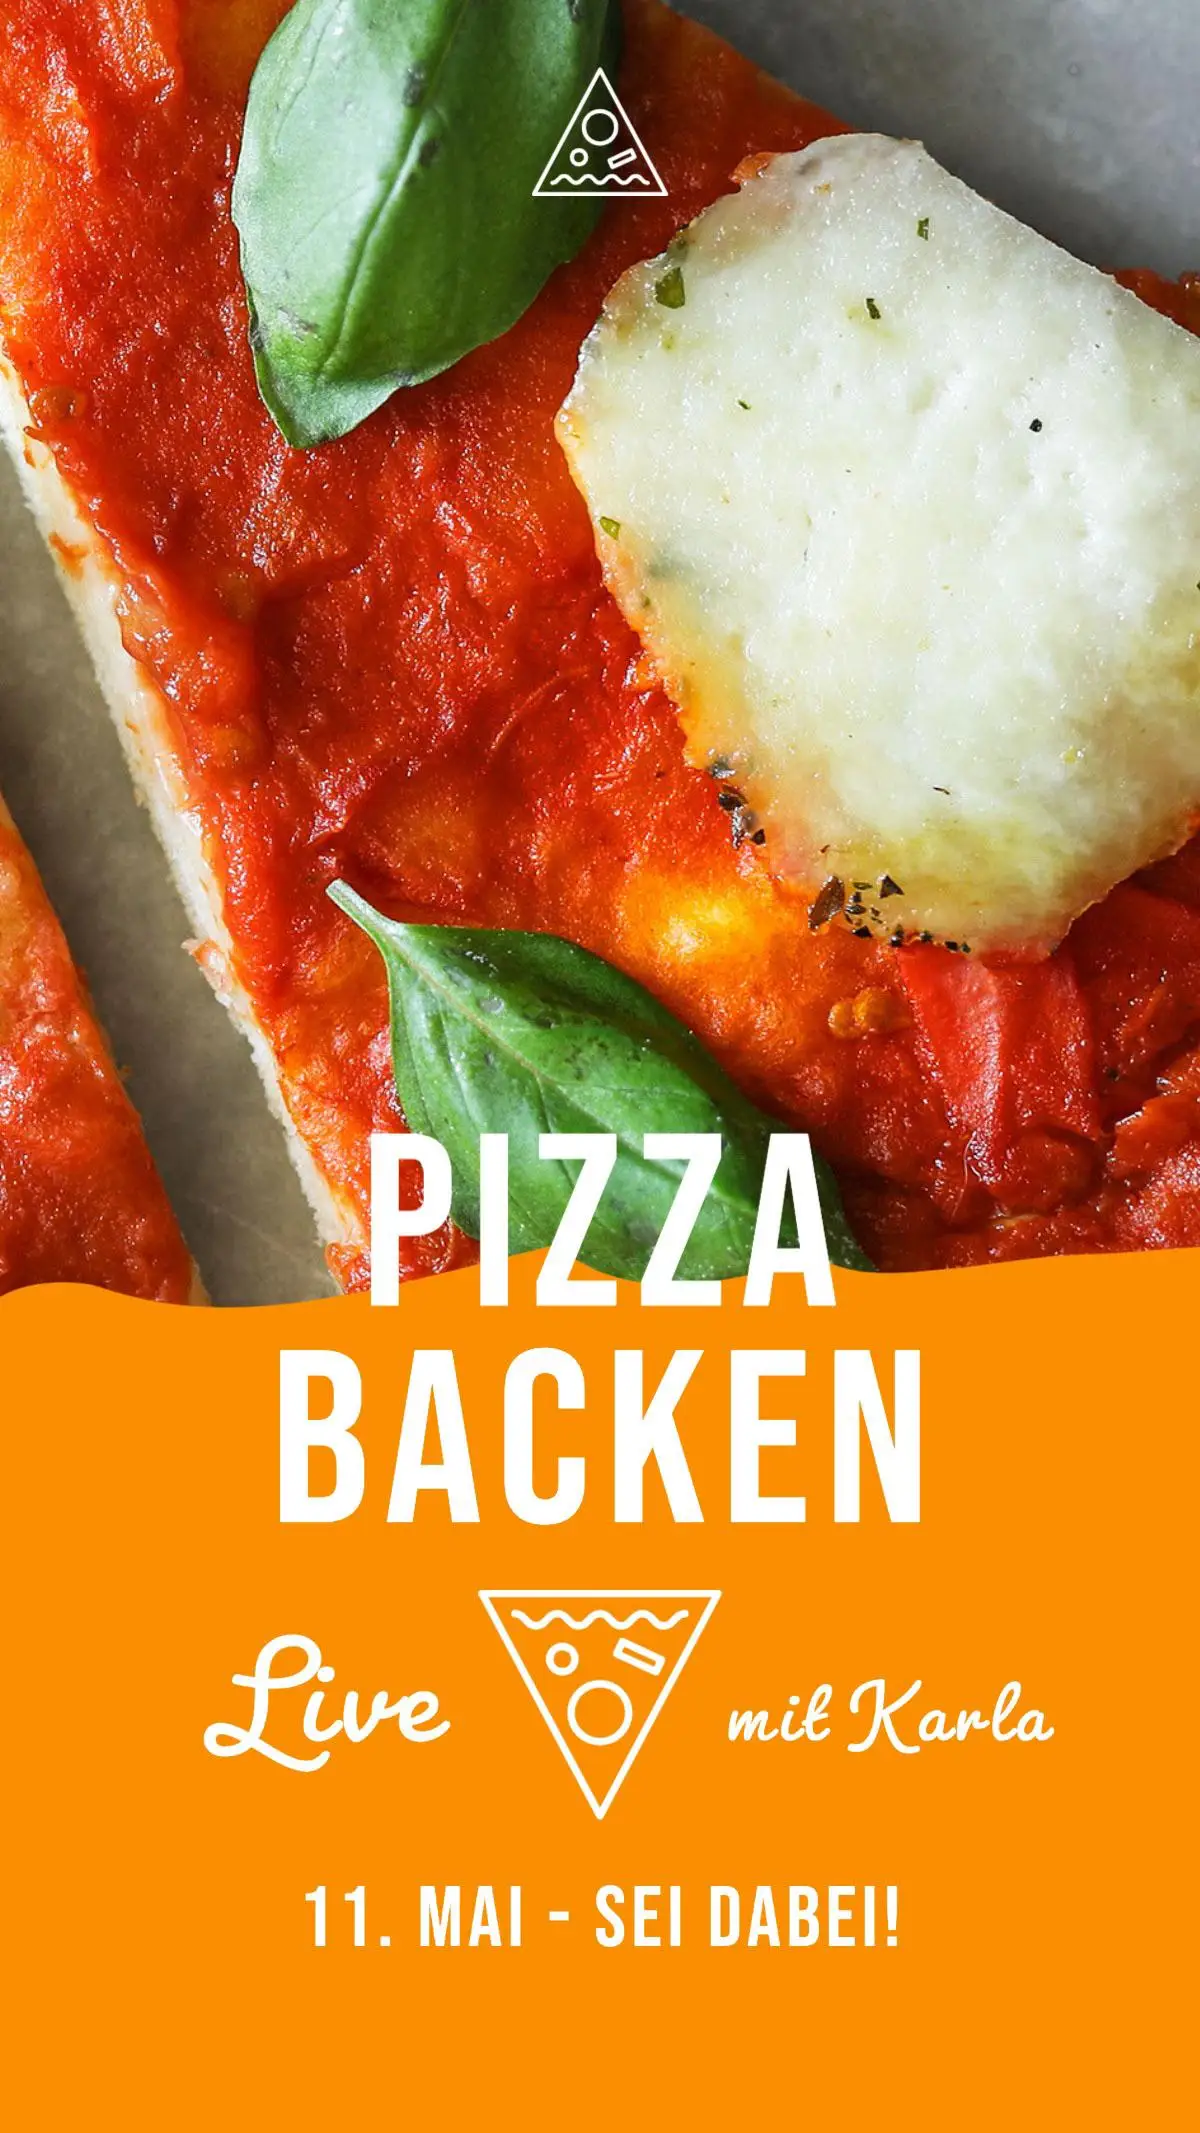 Orange Red Green Italian Cookalong Pizza Baking Instagram Story Ad